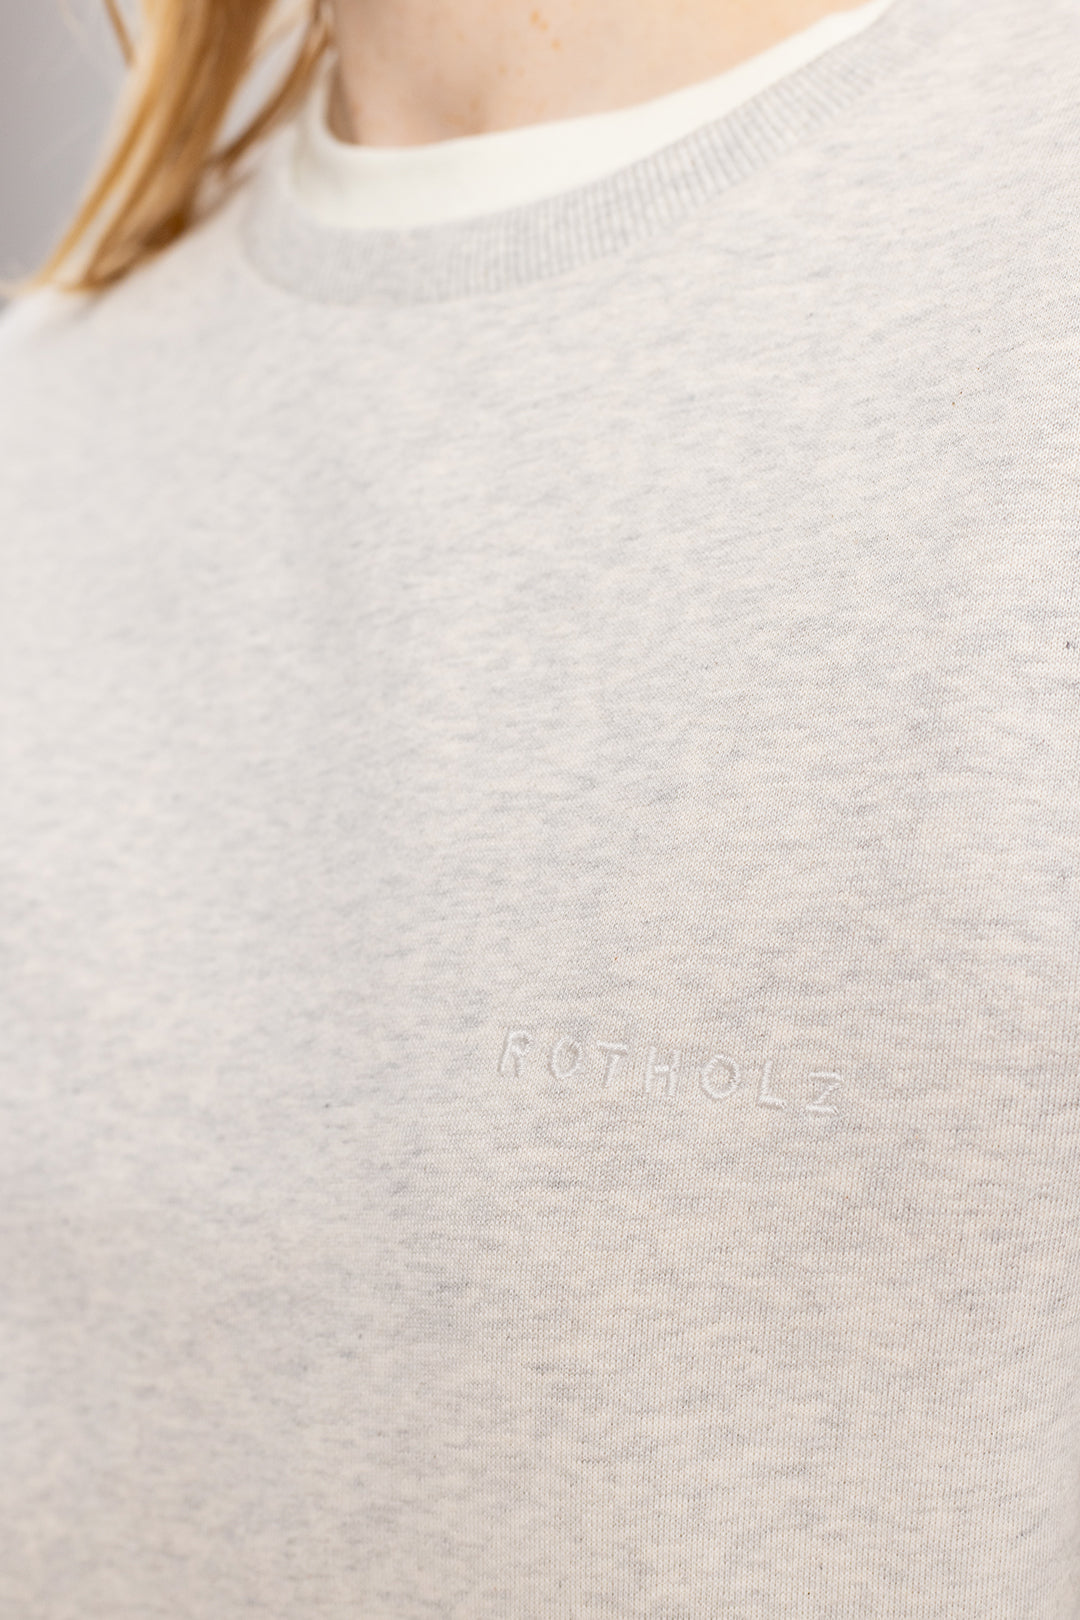 Light gray sweater logo made of organic cotton from Rotholz